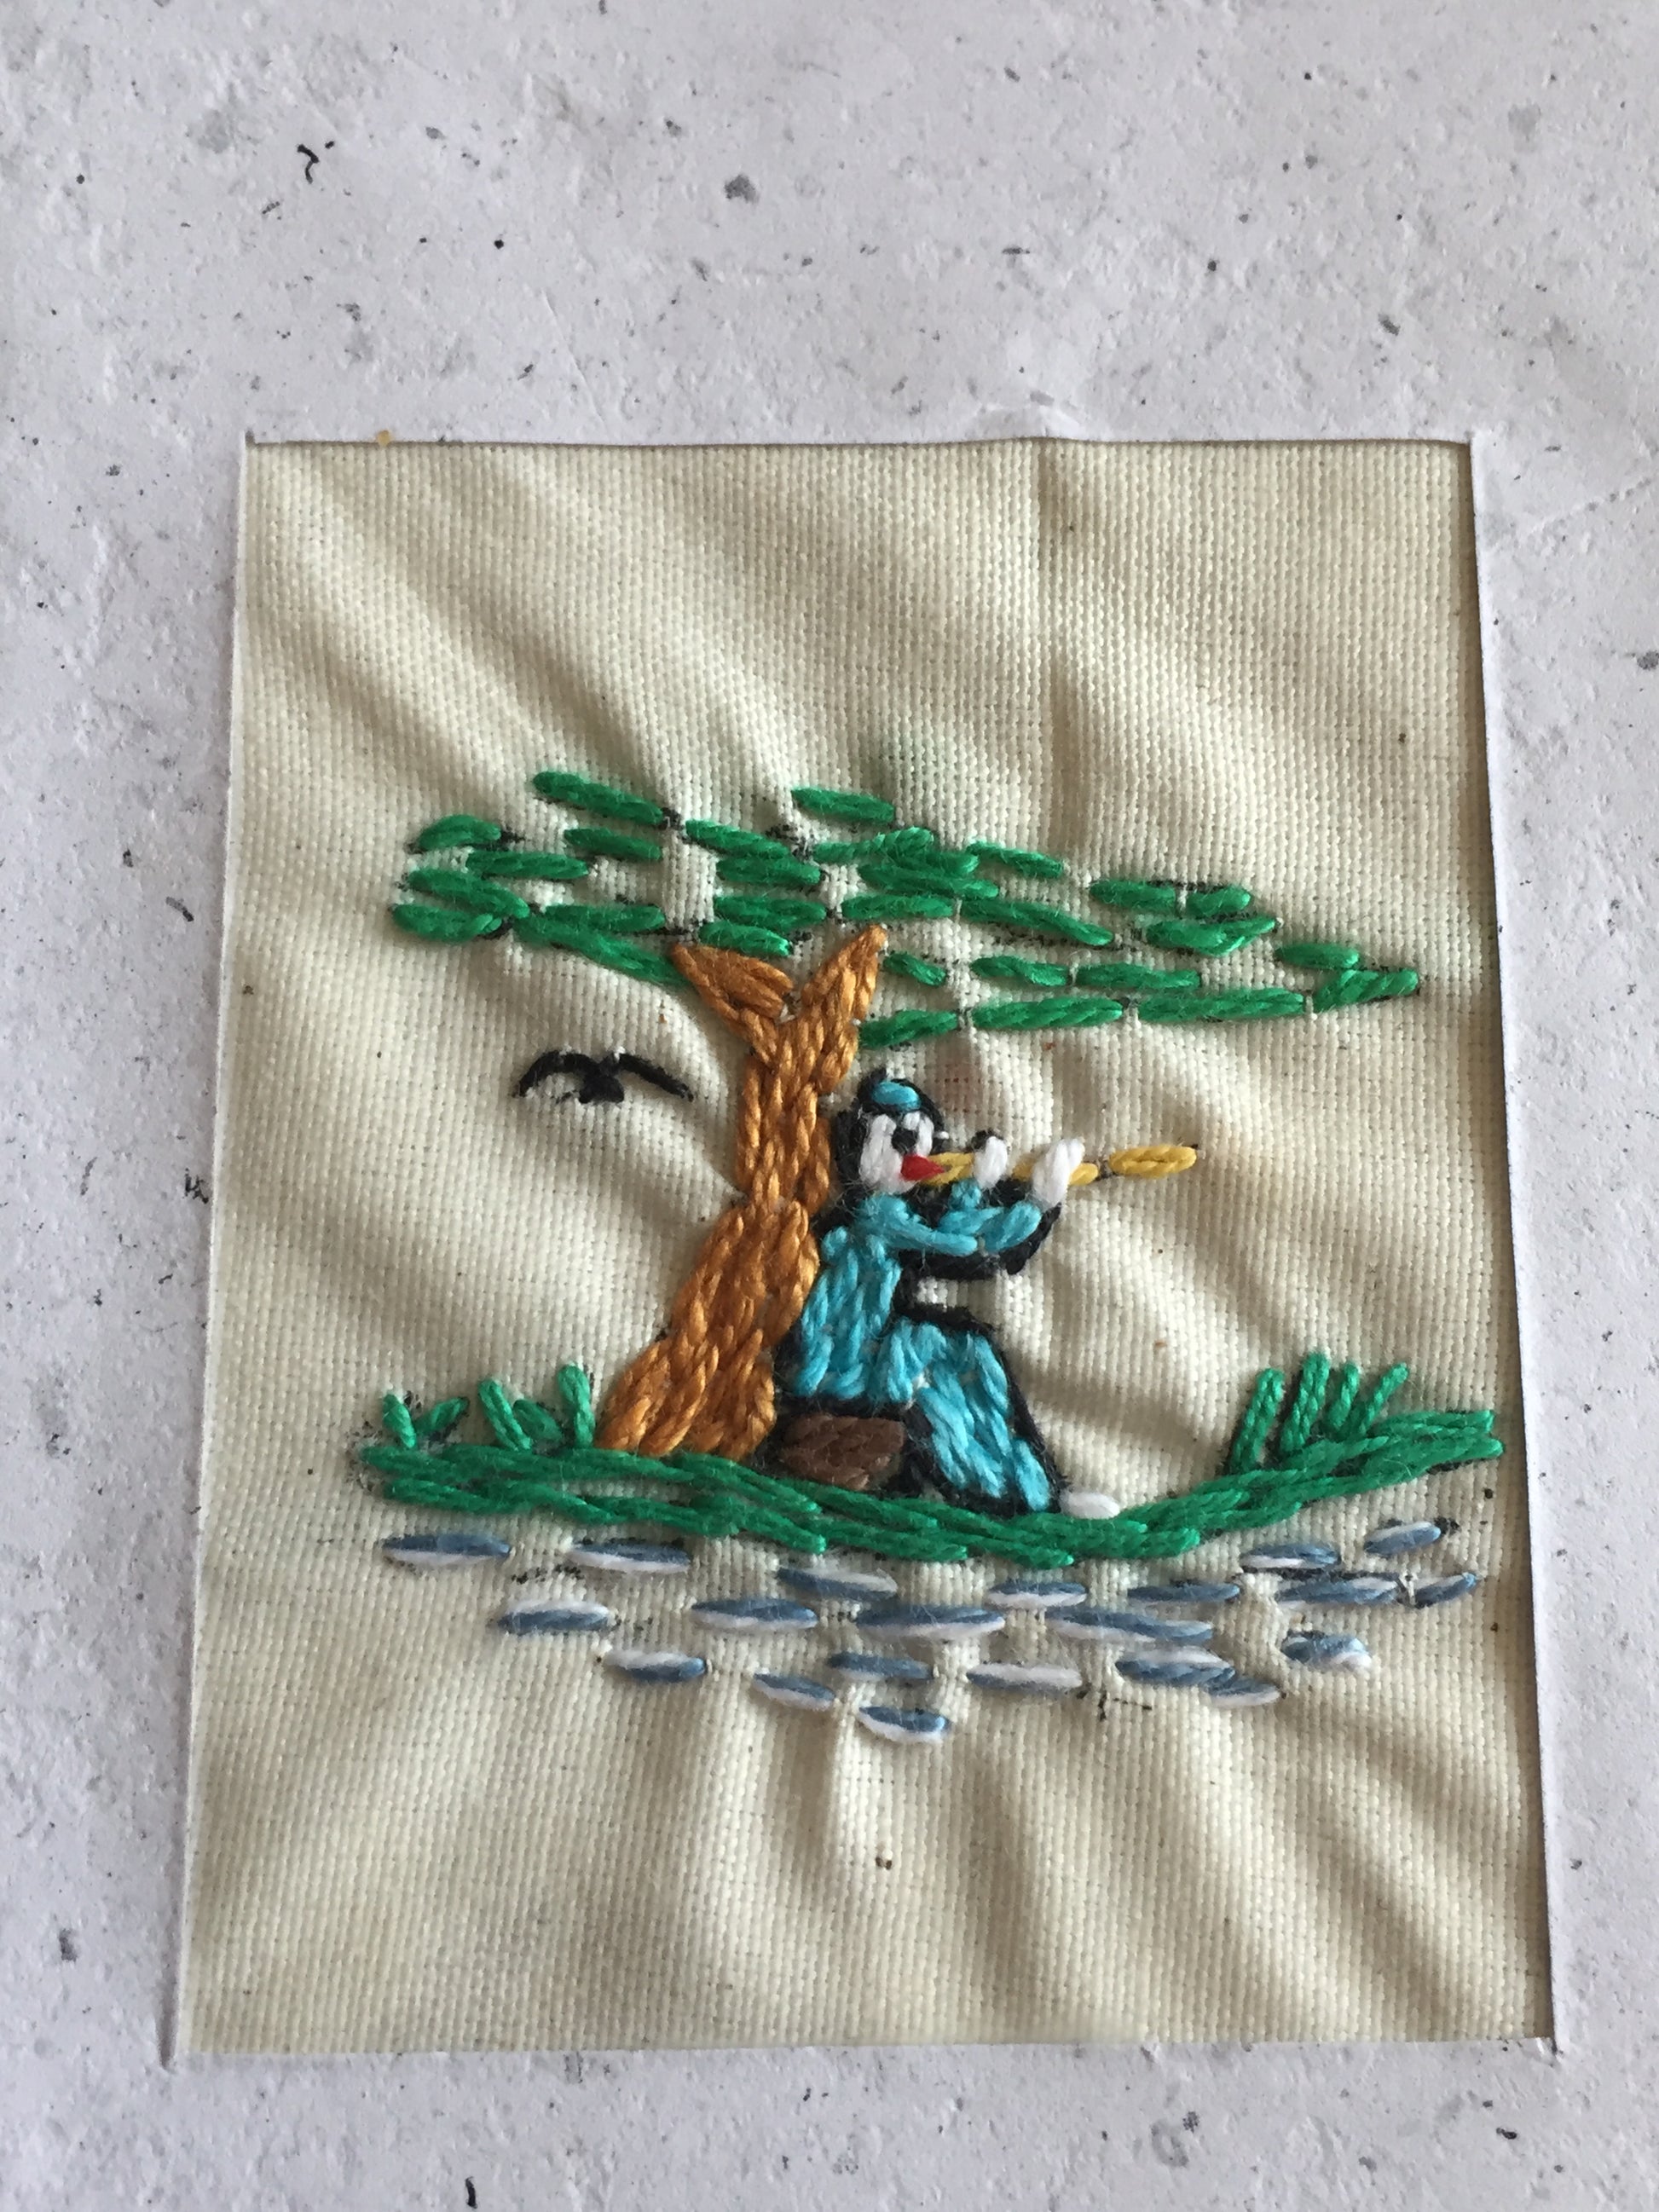 Handmade Recycled Paper Greeting Card with Embroidery - Flute Player